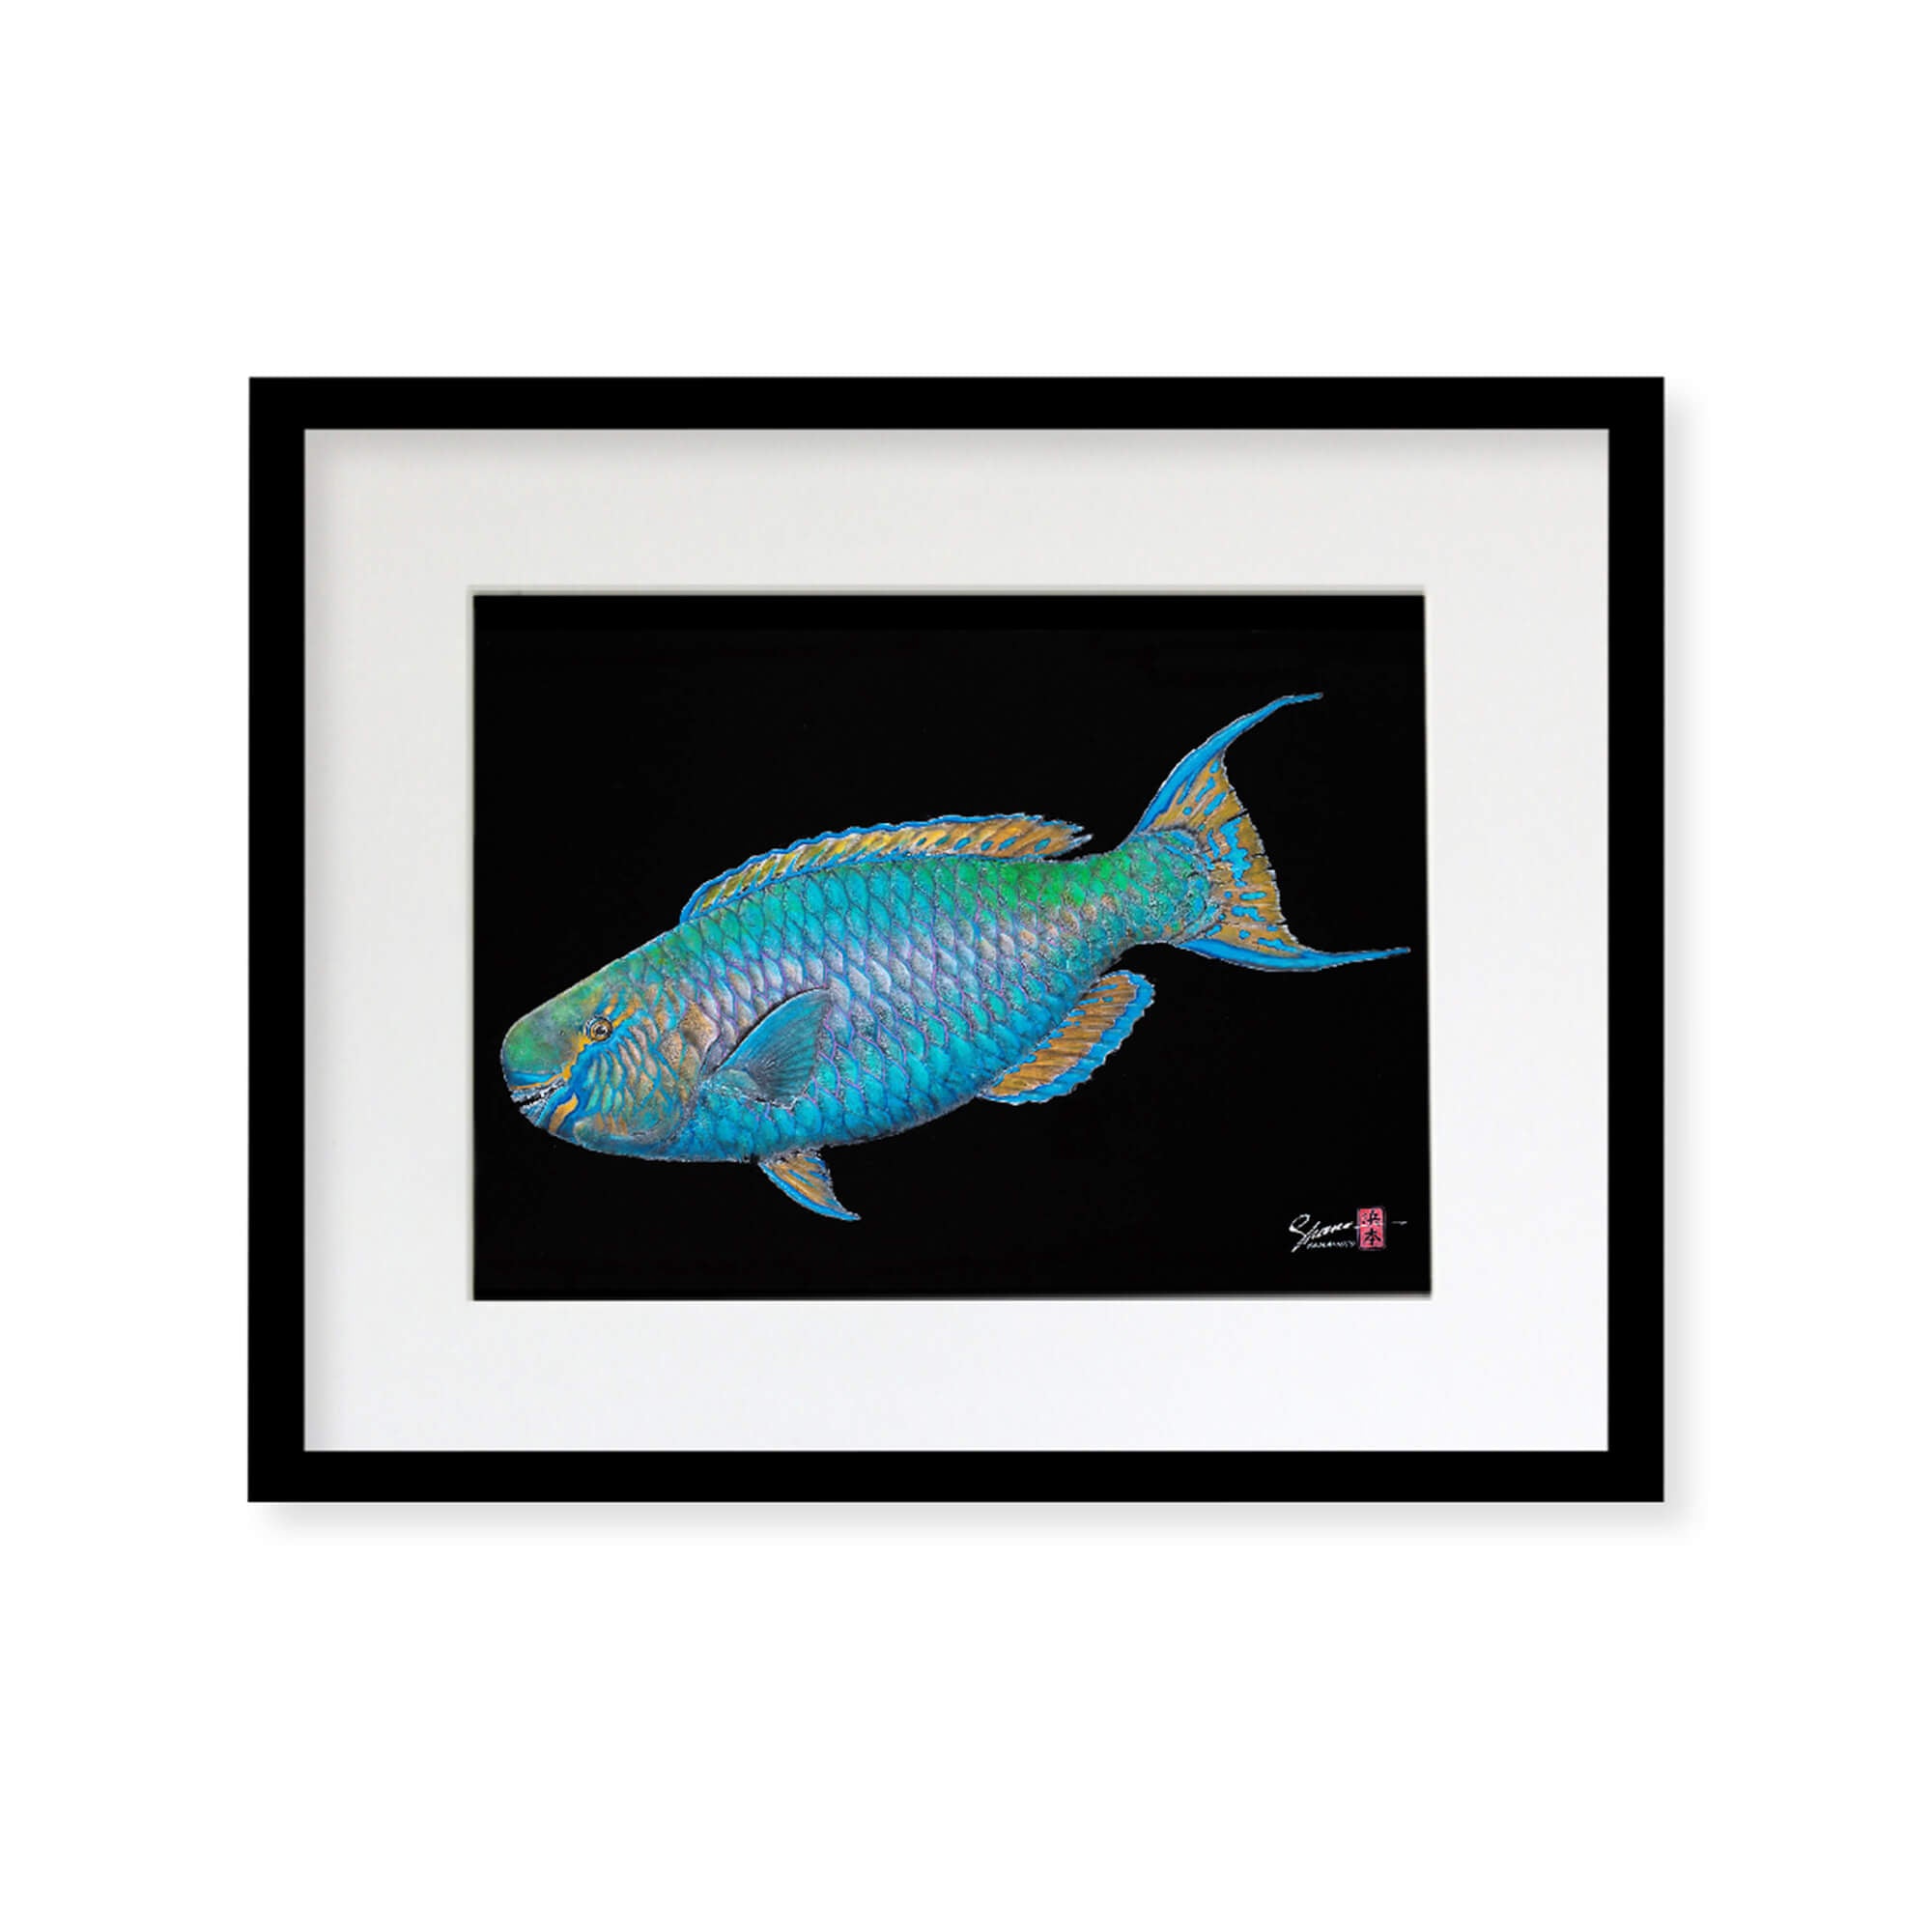 Framed matted print of Uhu (also known as Parrot Fish) by Hawaii gyotaku artist Shane Hamamoto